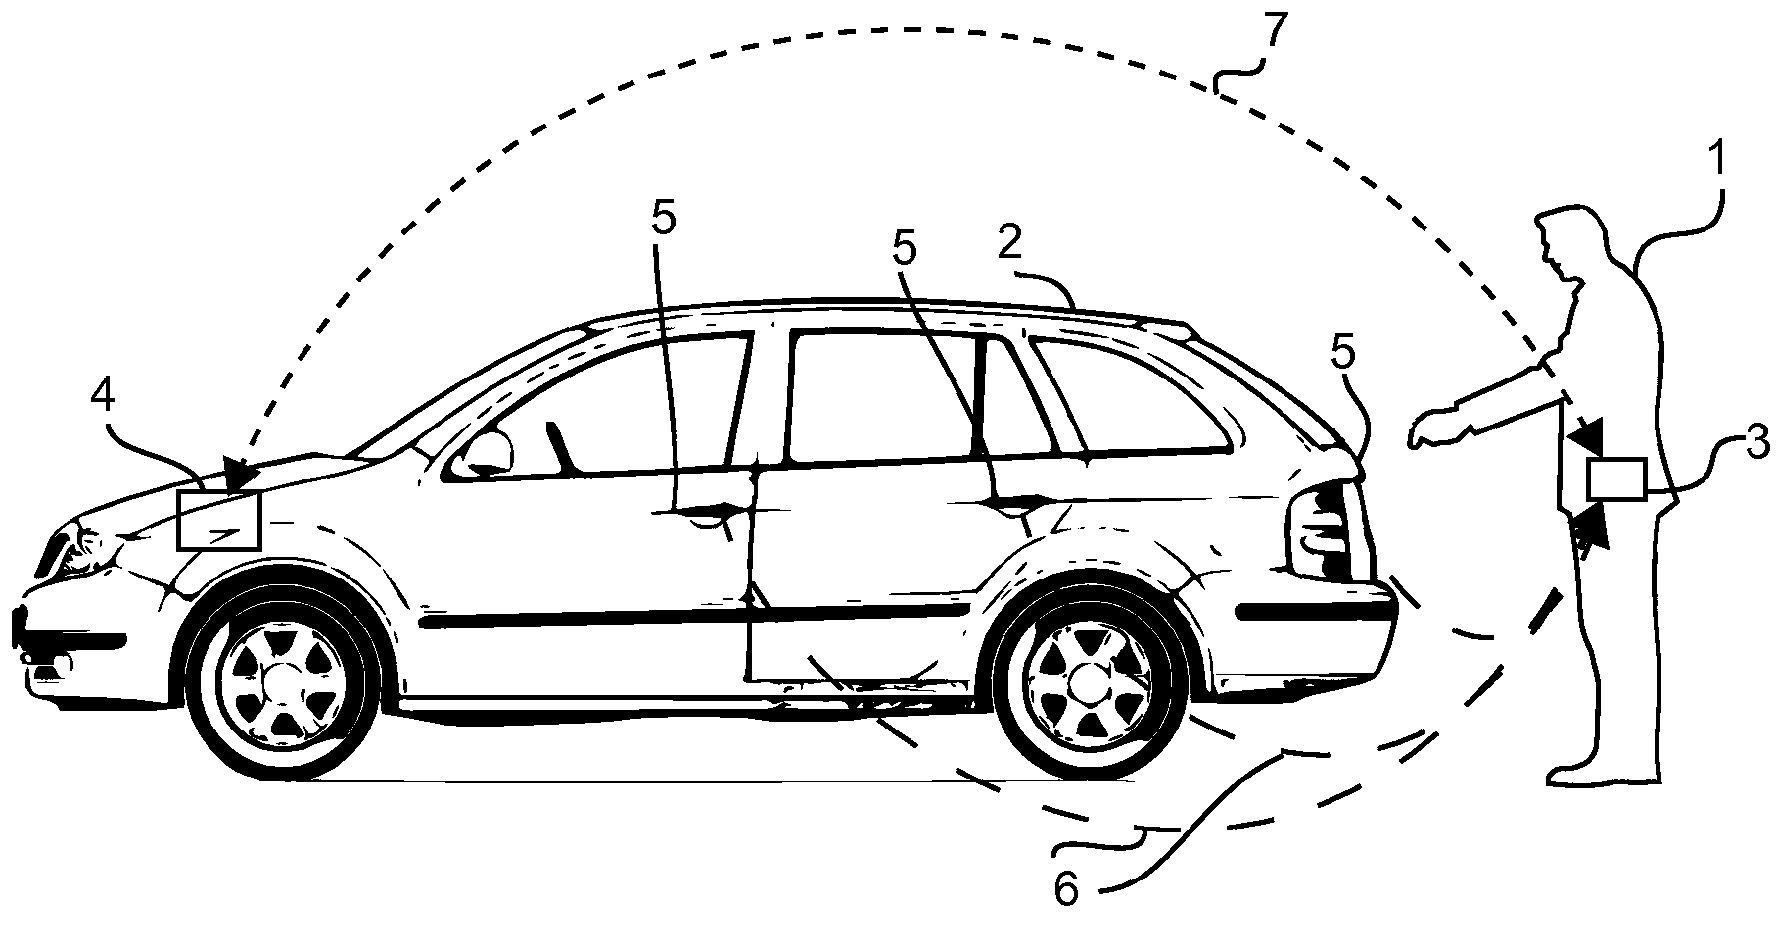 Access control method for motor vehicles